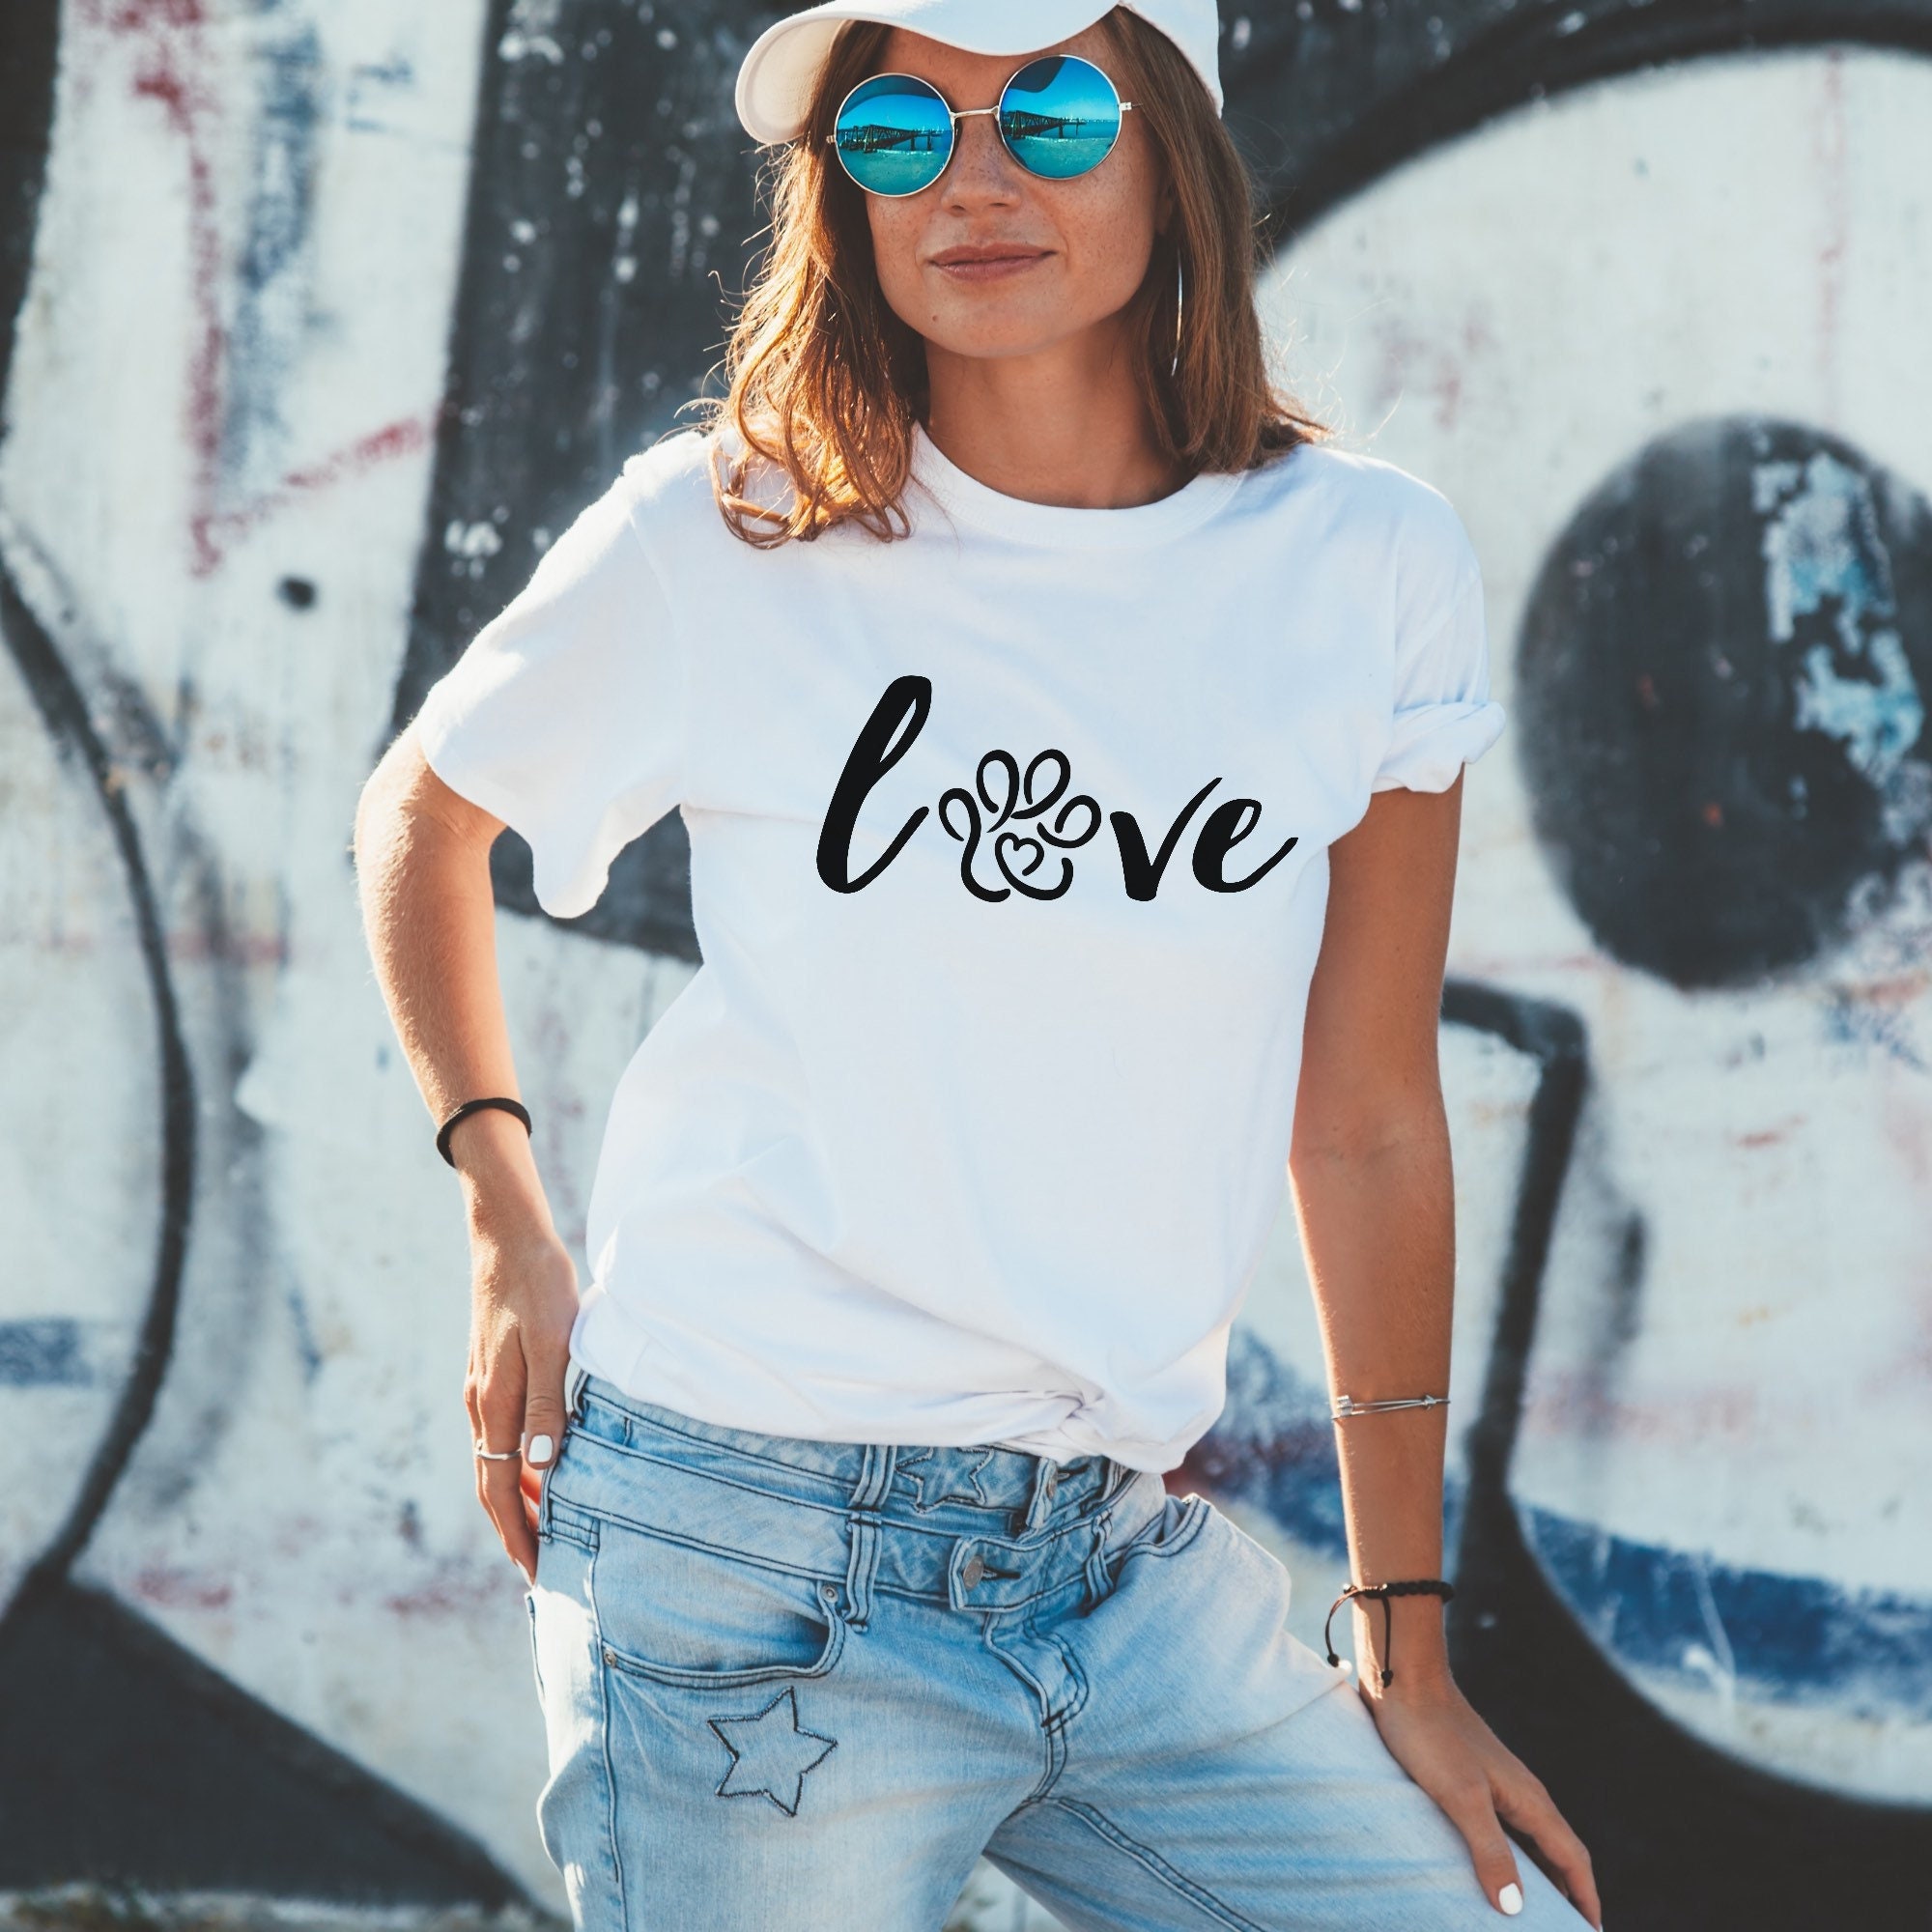 LOVE DOGS & SHOES T-Shirt Fitted Woman's Print Top Fun Glitter paw print Hearts 